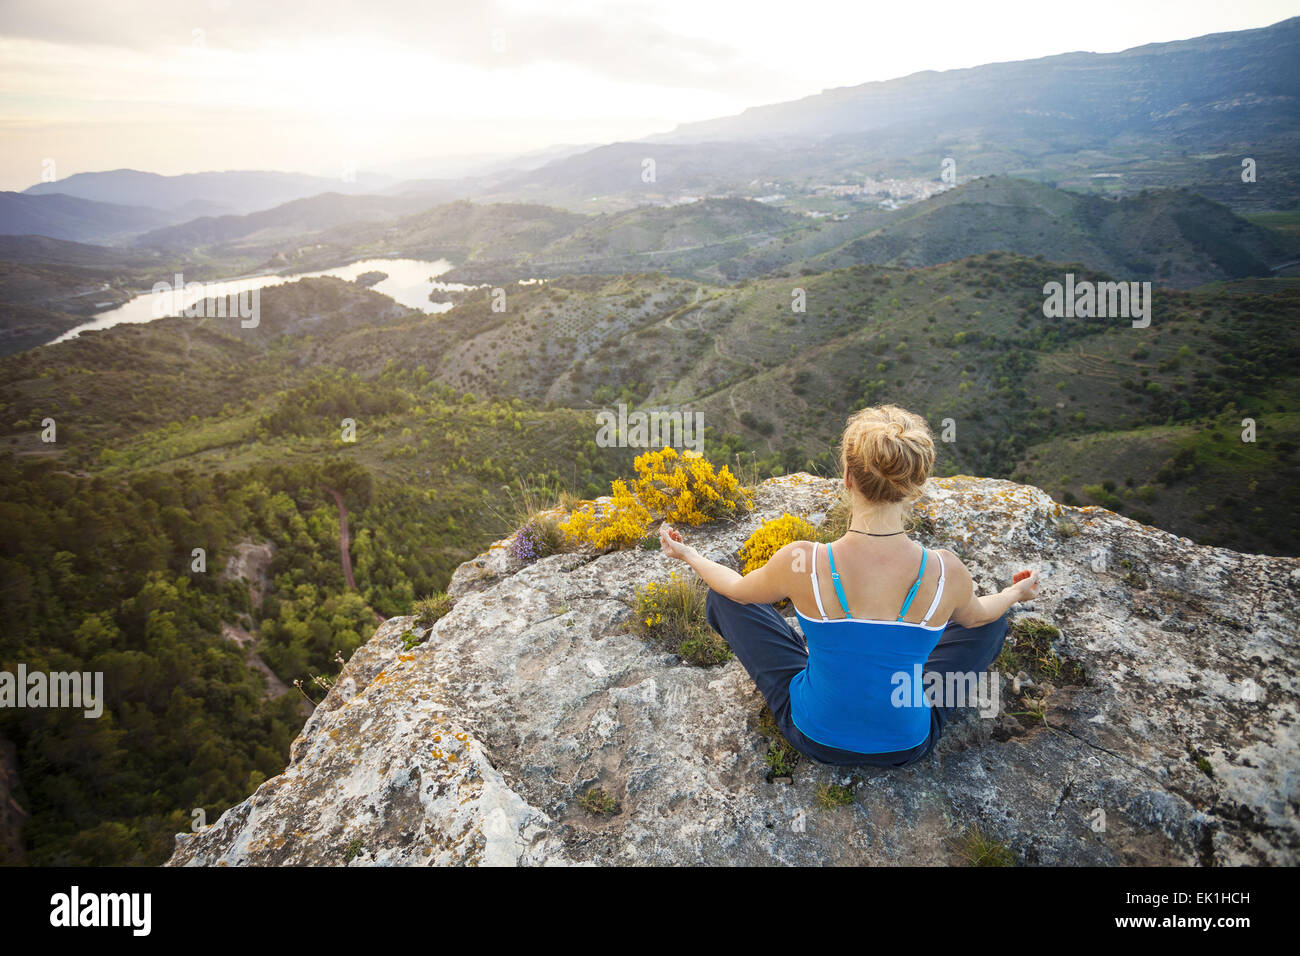 Young woman sitting on a rock and enjoying valley view. Girl sits in asana position. Stock Photo